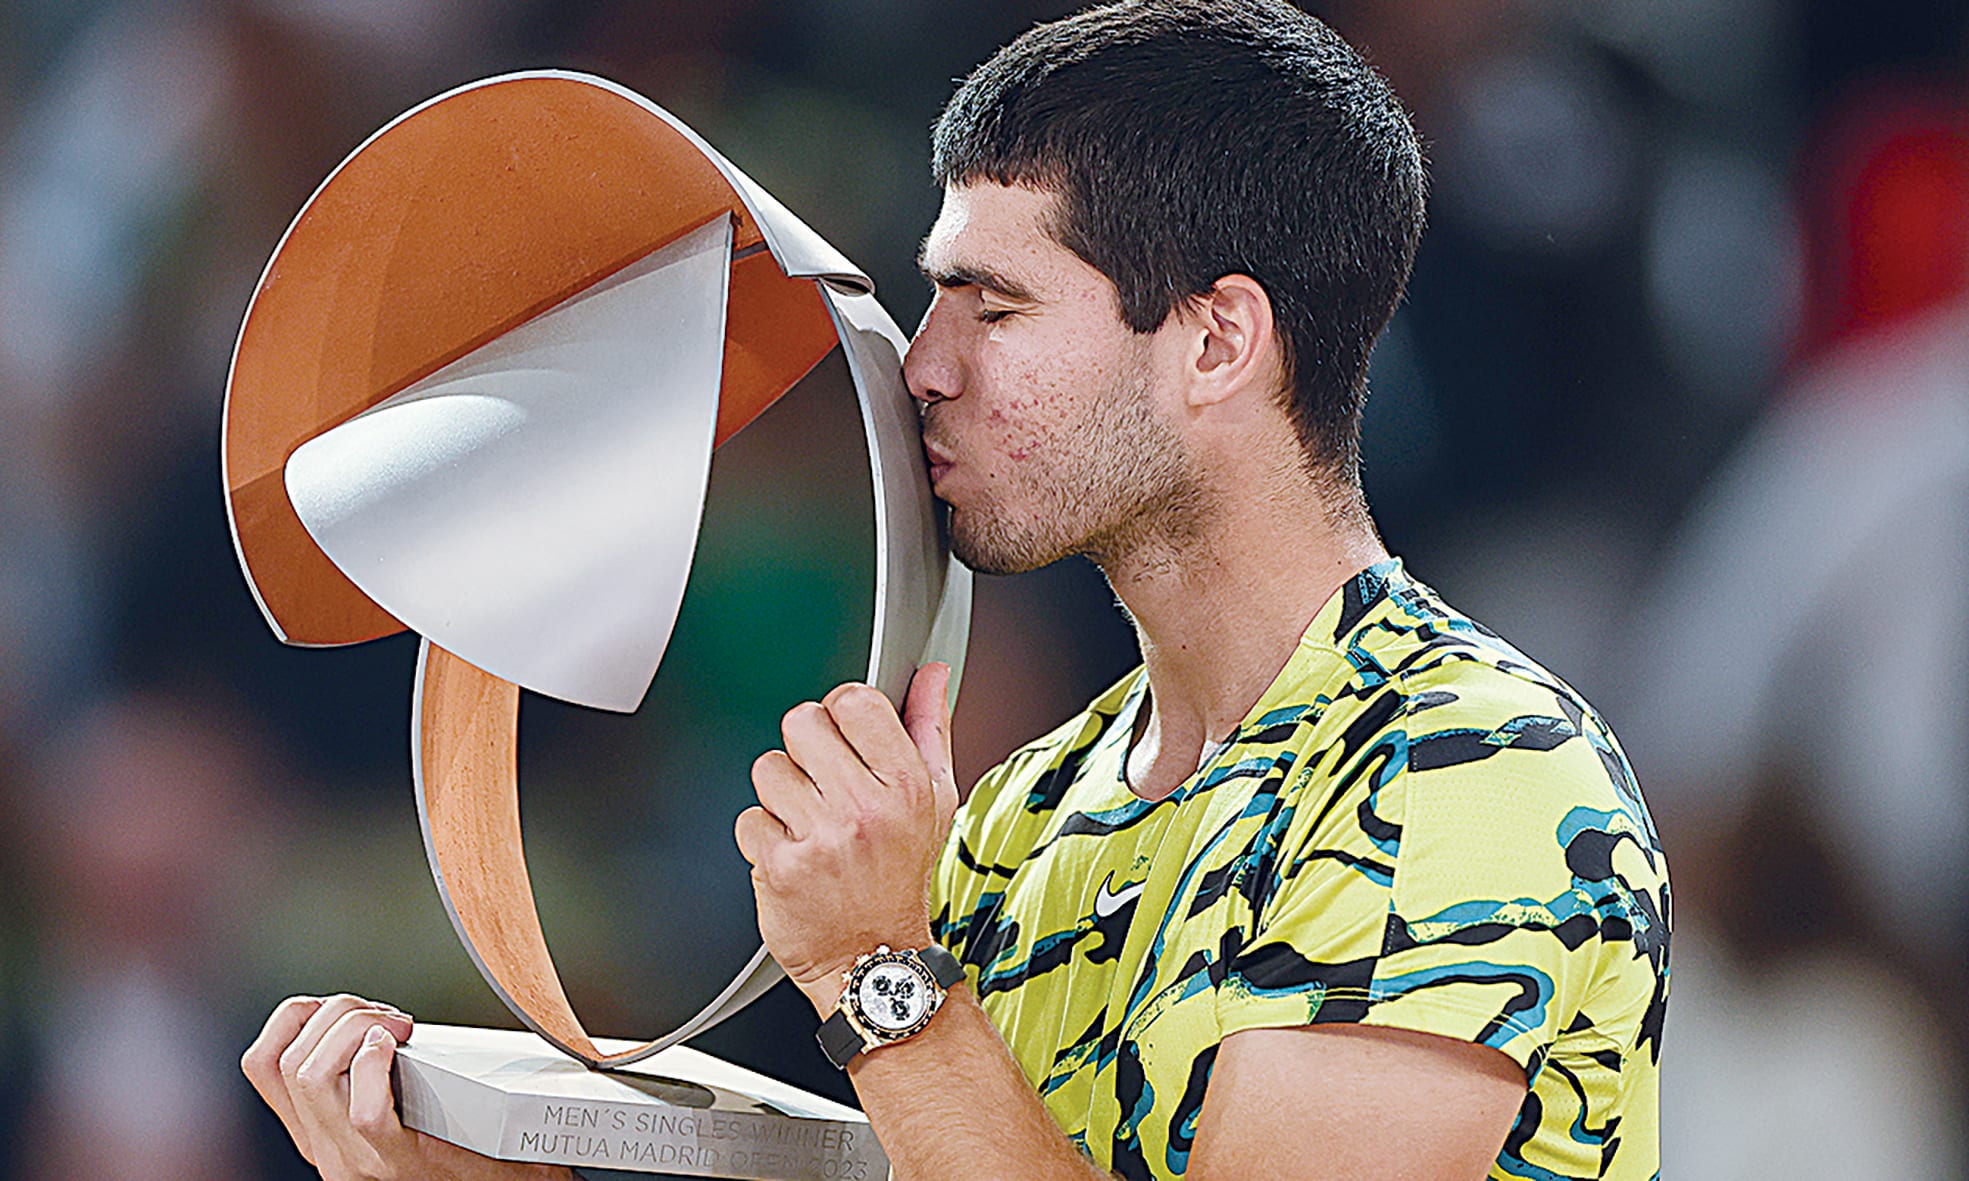 MADRID: Spain’s Carlos Alcaraz poses for pictures with the trophy after winning the 2023 ATP Tour Madrid Open tennis tournament singles final match against Germany’s Jan-Lennard Struff on May 7, 2023. - AFP